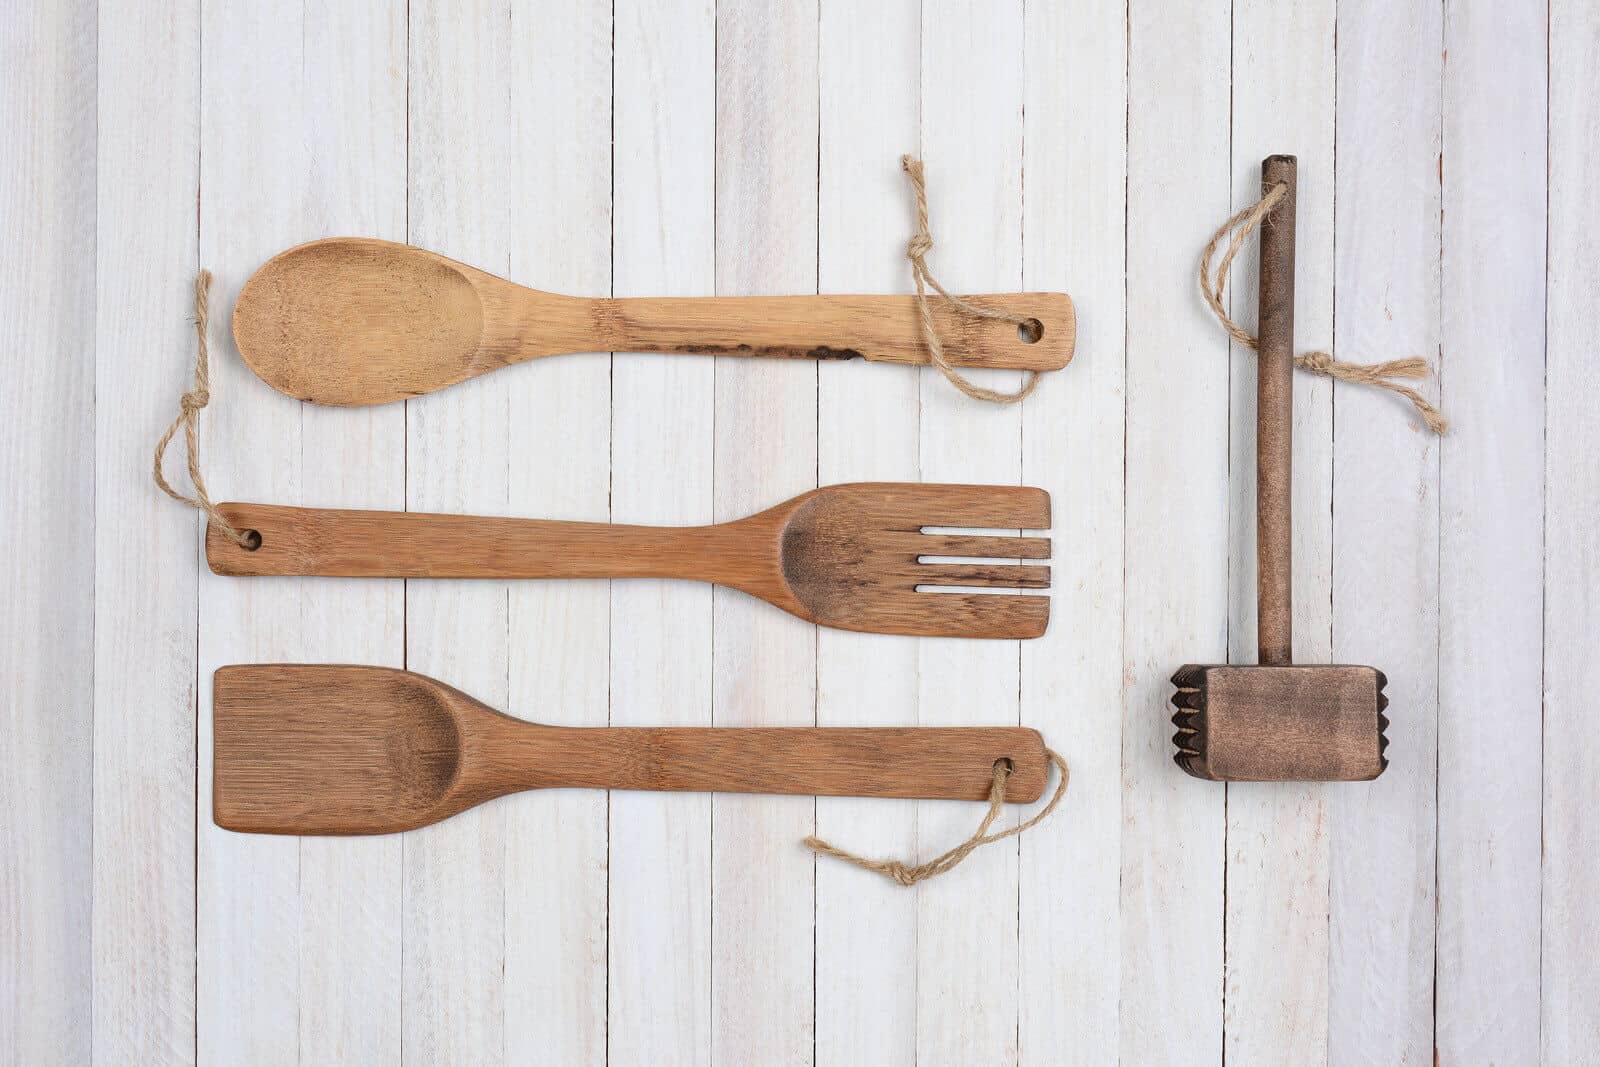 Making Your Own Wooden Utensils